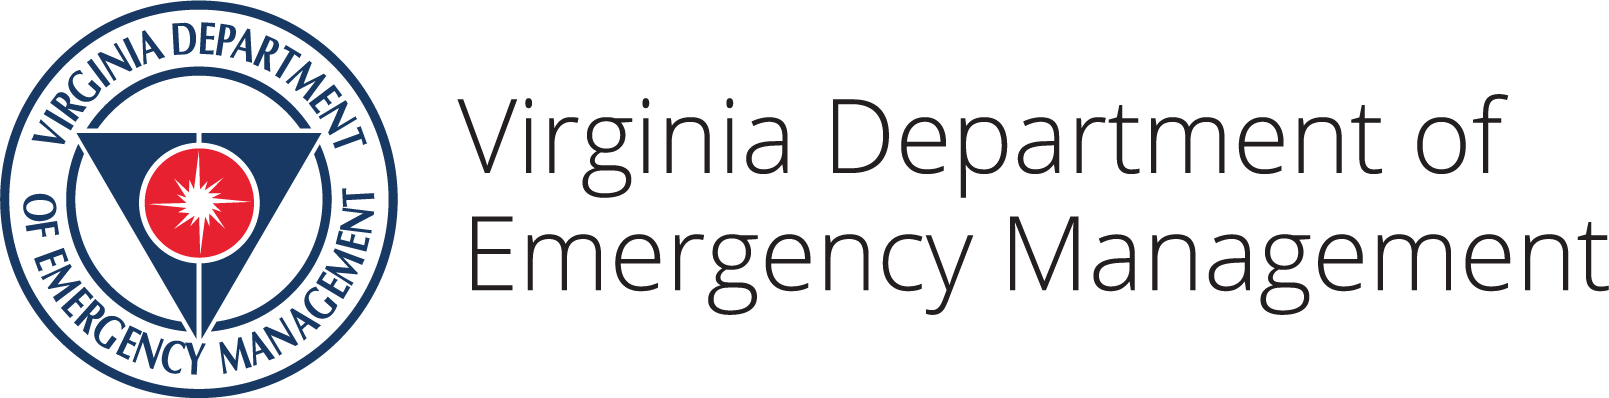 Virginia Department of Emergency Management banner graphic